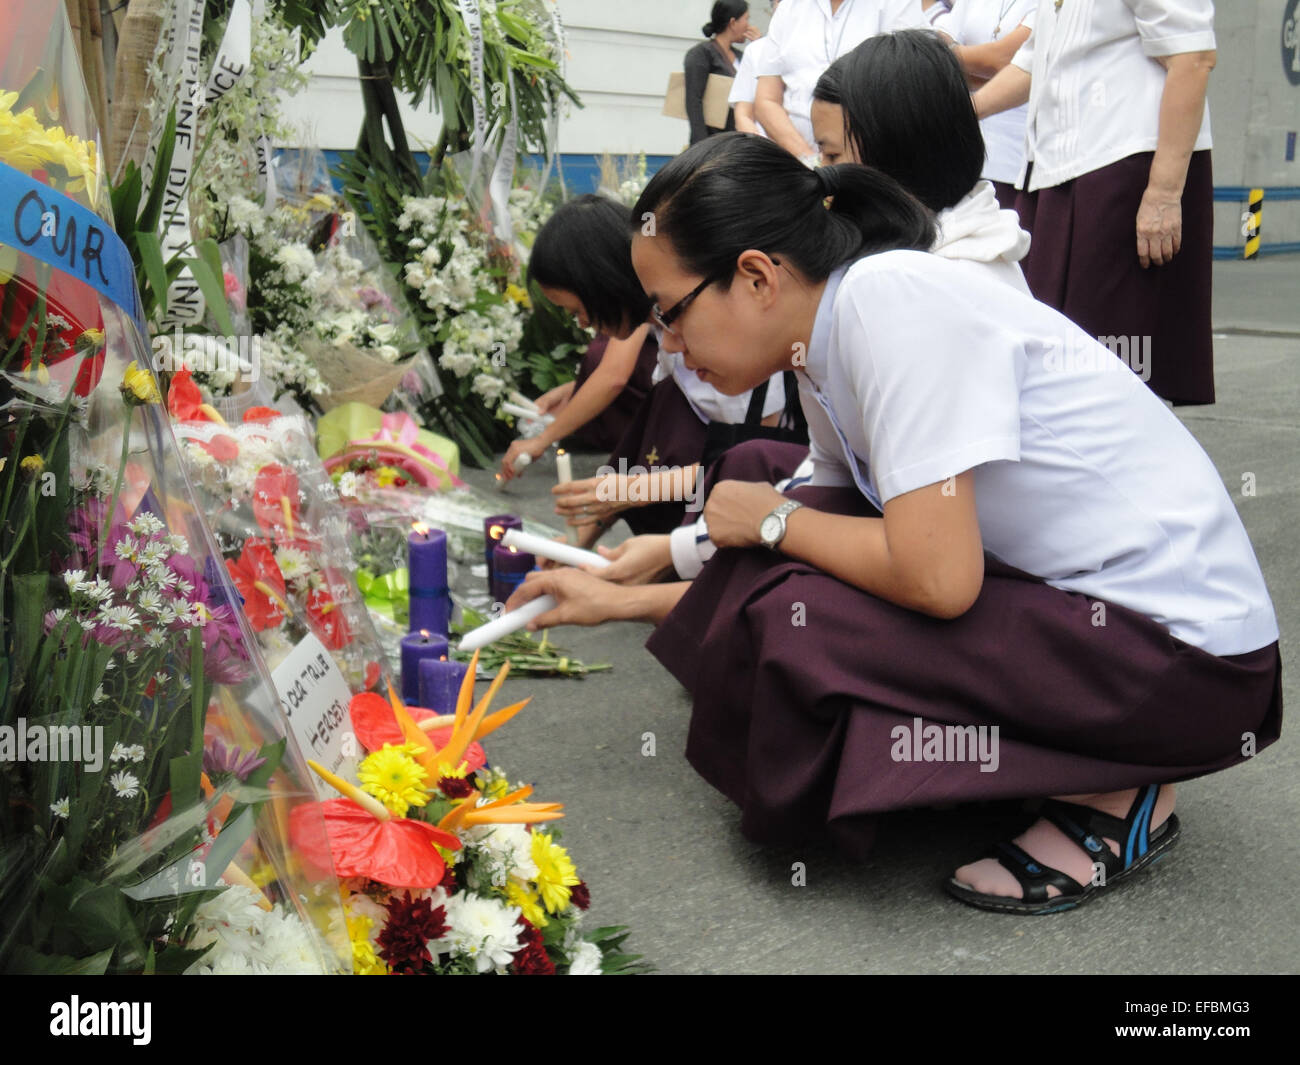 Nuns from the Religious of the Assumption light candles outside the Philippine National Police headquarters. Philippine President Benigno Aquino III declared a National Day of Mourning to commemorate the 44 elite commandos who were slain in an encounter at Mamasapano, Maguindanao province. © Richard James Mendoza/Pacific Press/Alamy Live News Stock Photo